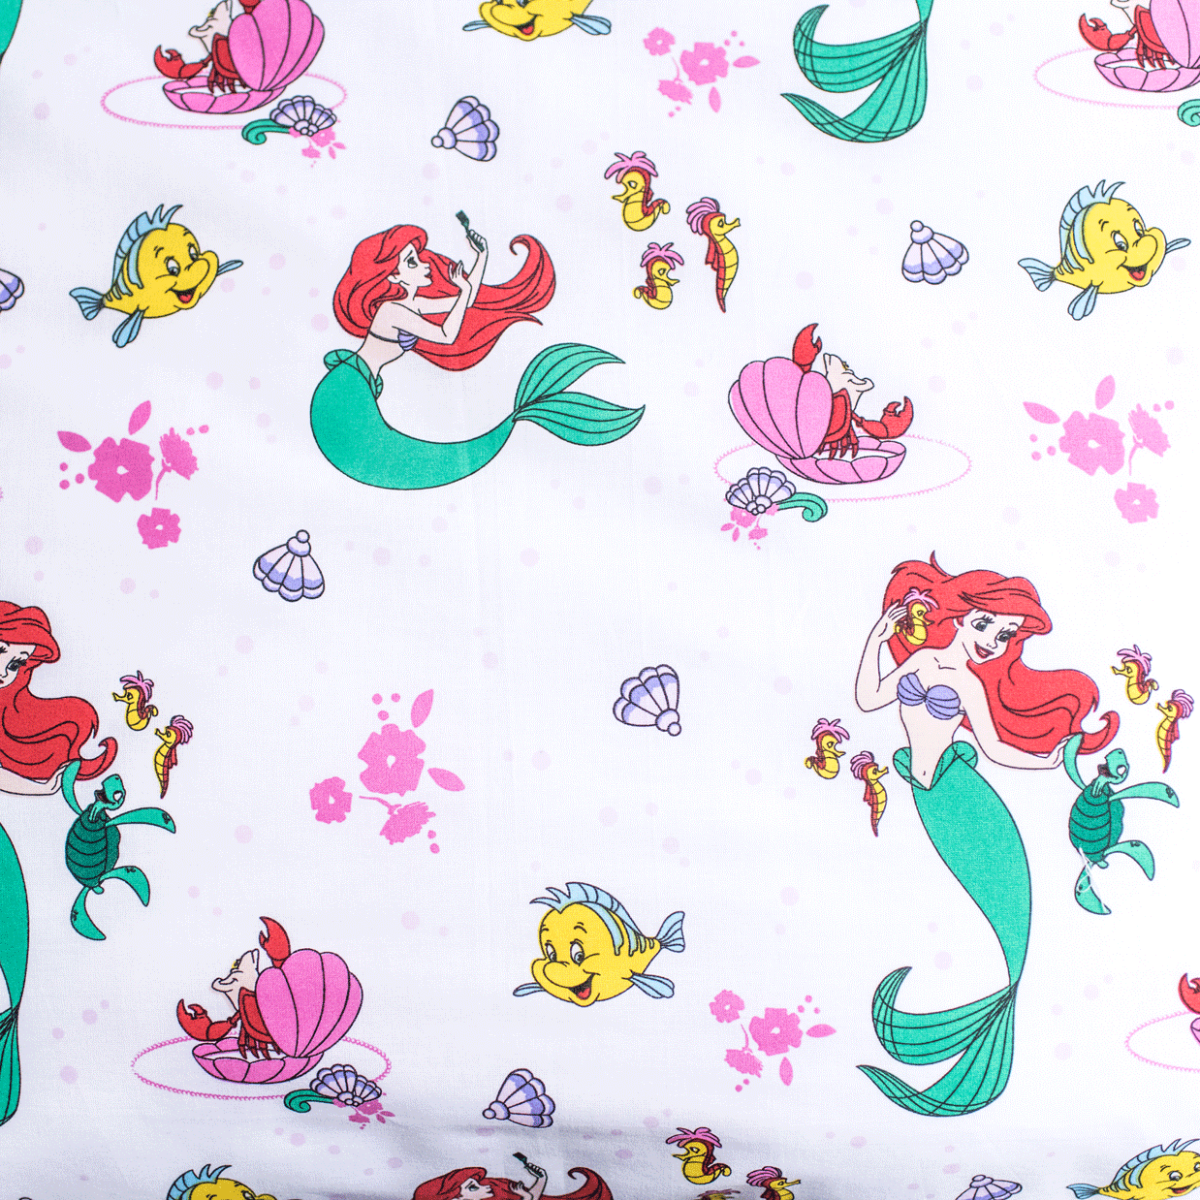 Disney Princess Ariel Under the Sea 100% Cotton Single Fitted Sheet